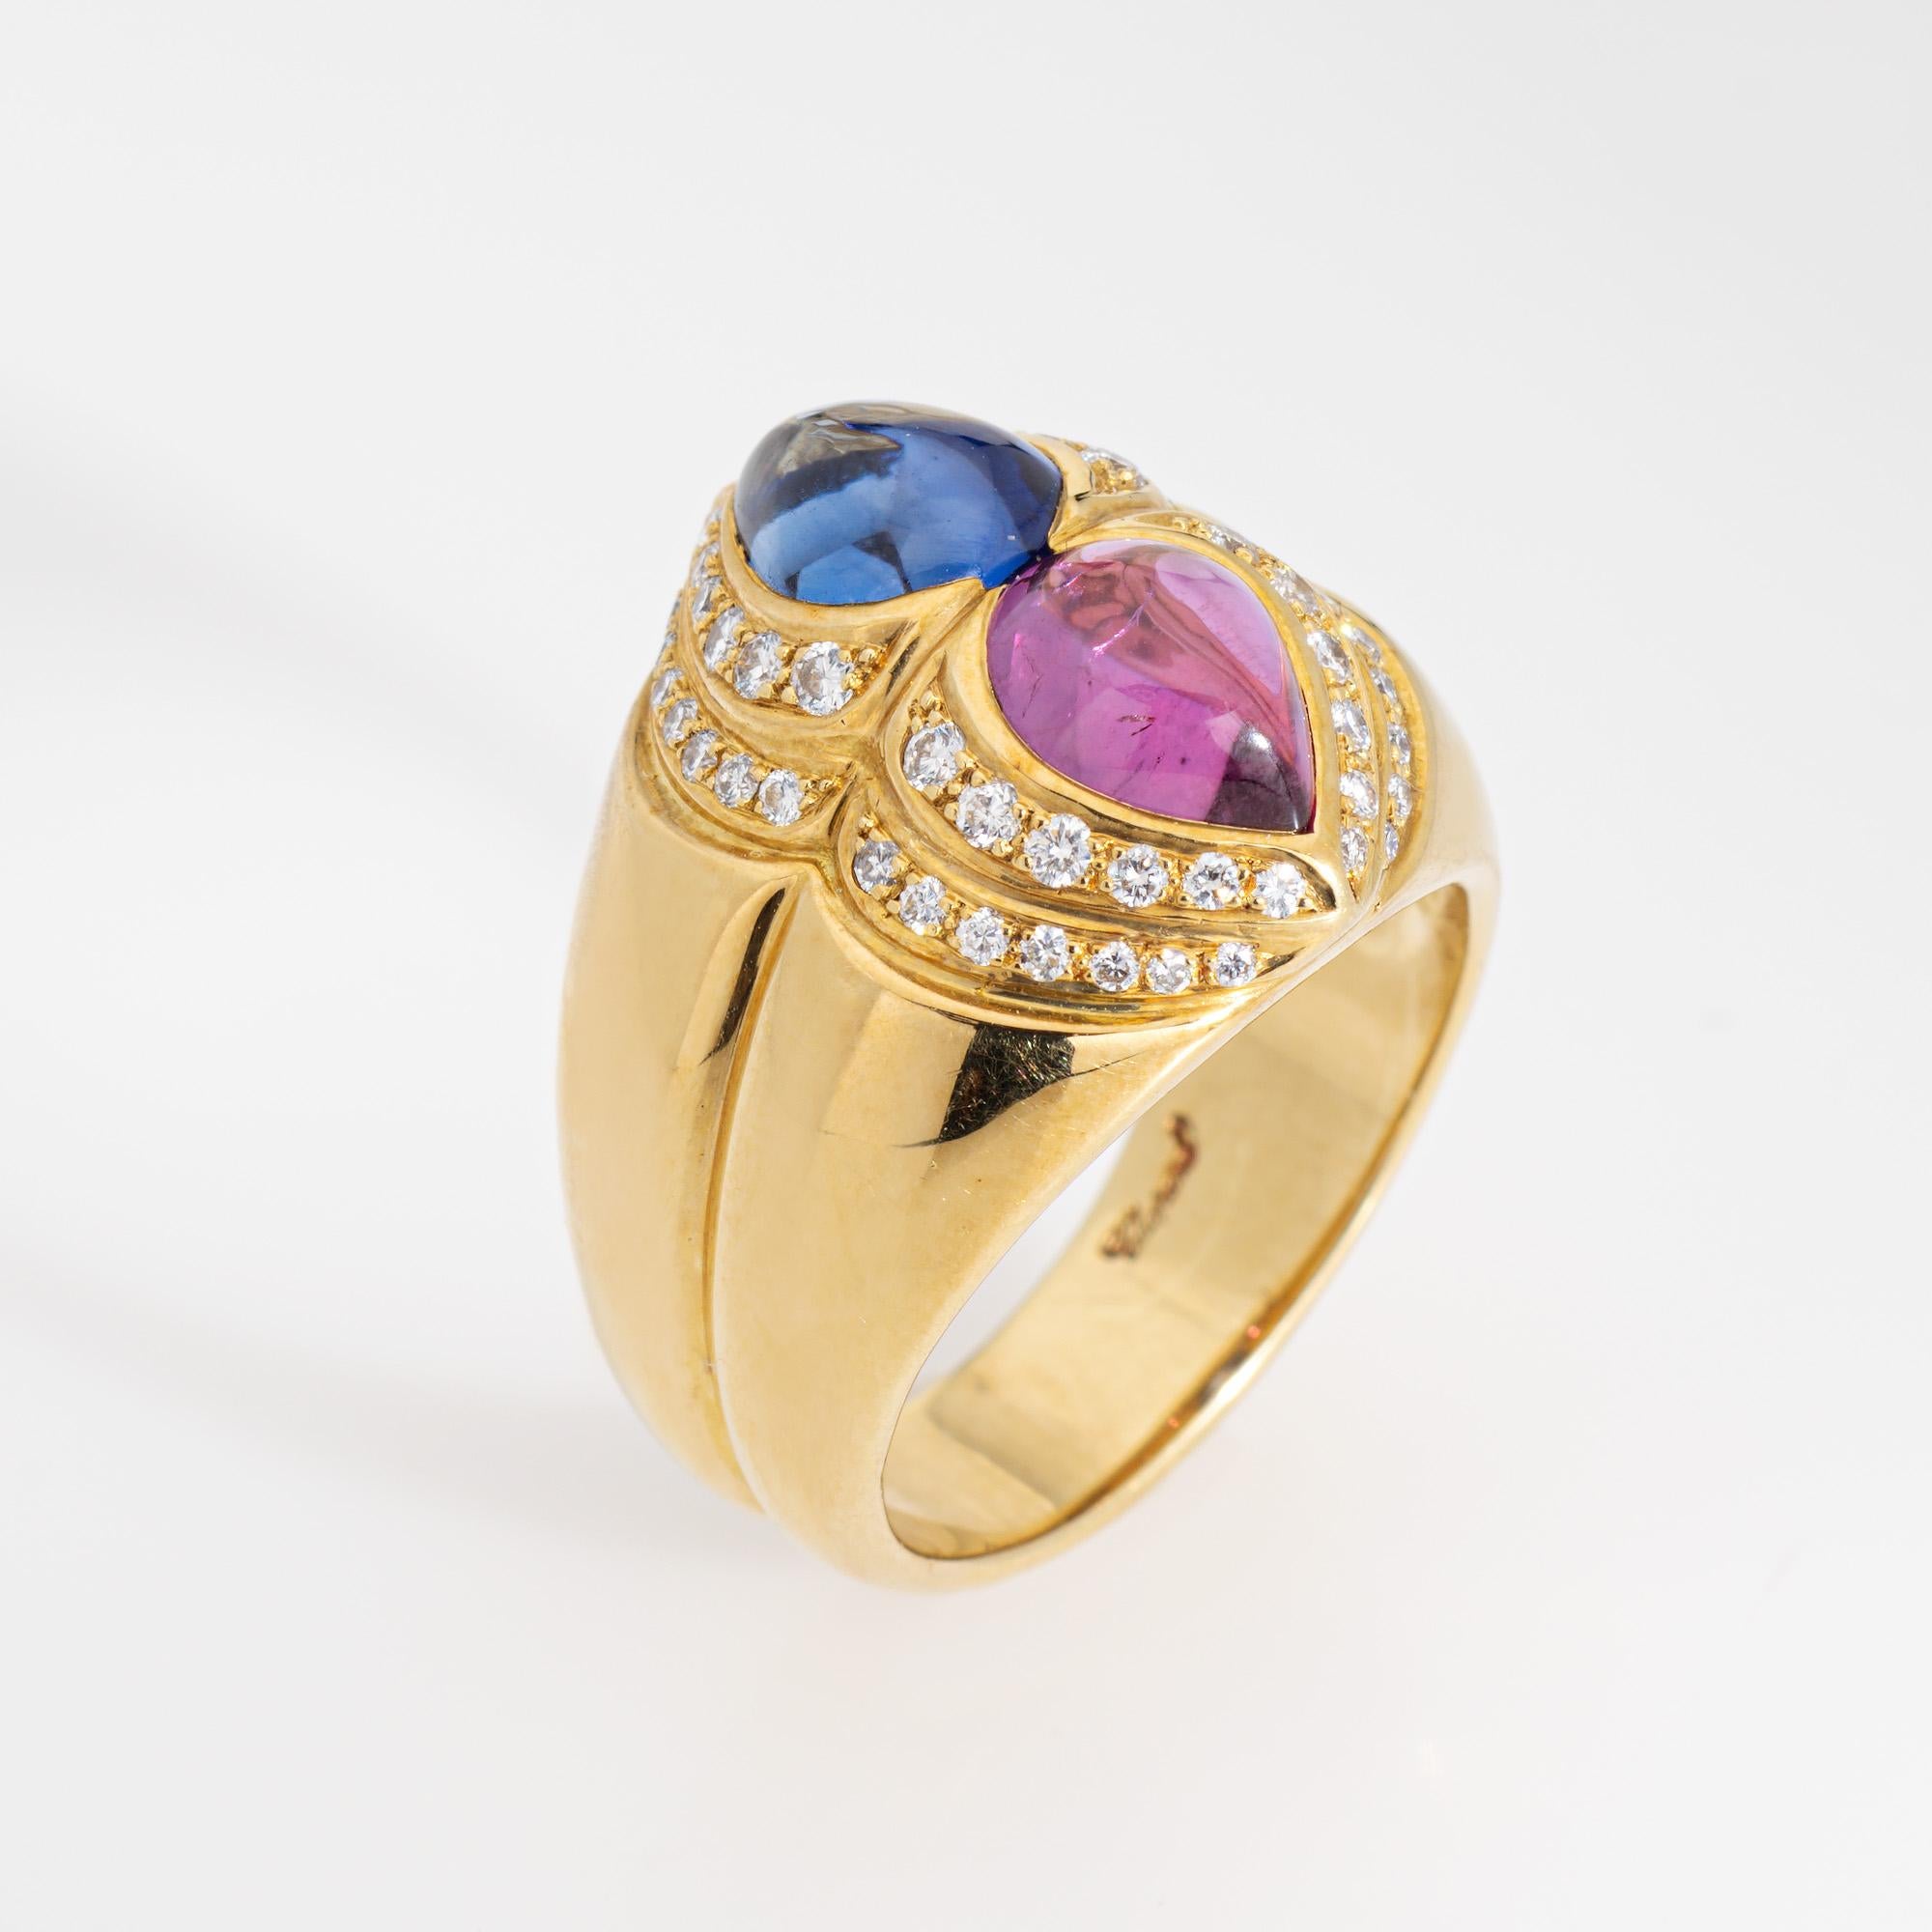 Estate Chopard pink & blue sapphire ring crafted in 18 karat yellow gold.  

Cabochon cut pink and blue sapphires measure 7.5mm x 5.5mm. Diamonds total an estimated 0.25 carats (estimated at G-H color and VS2-SI1 clarity). The sapphires are in very